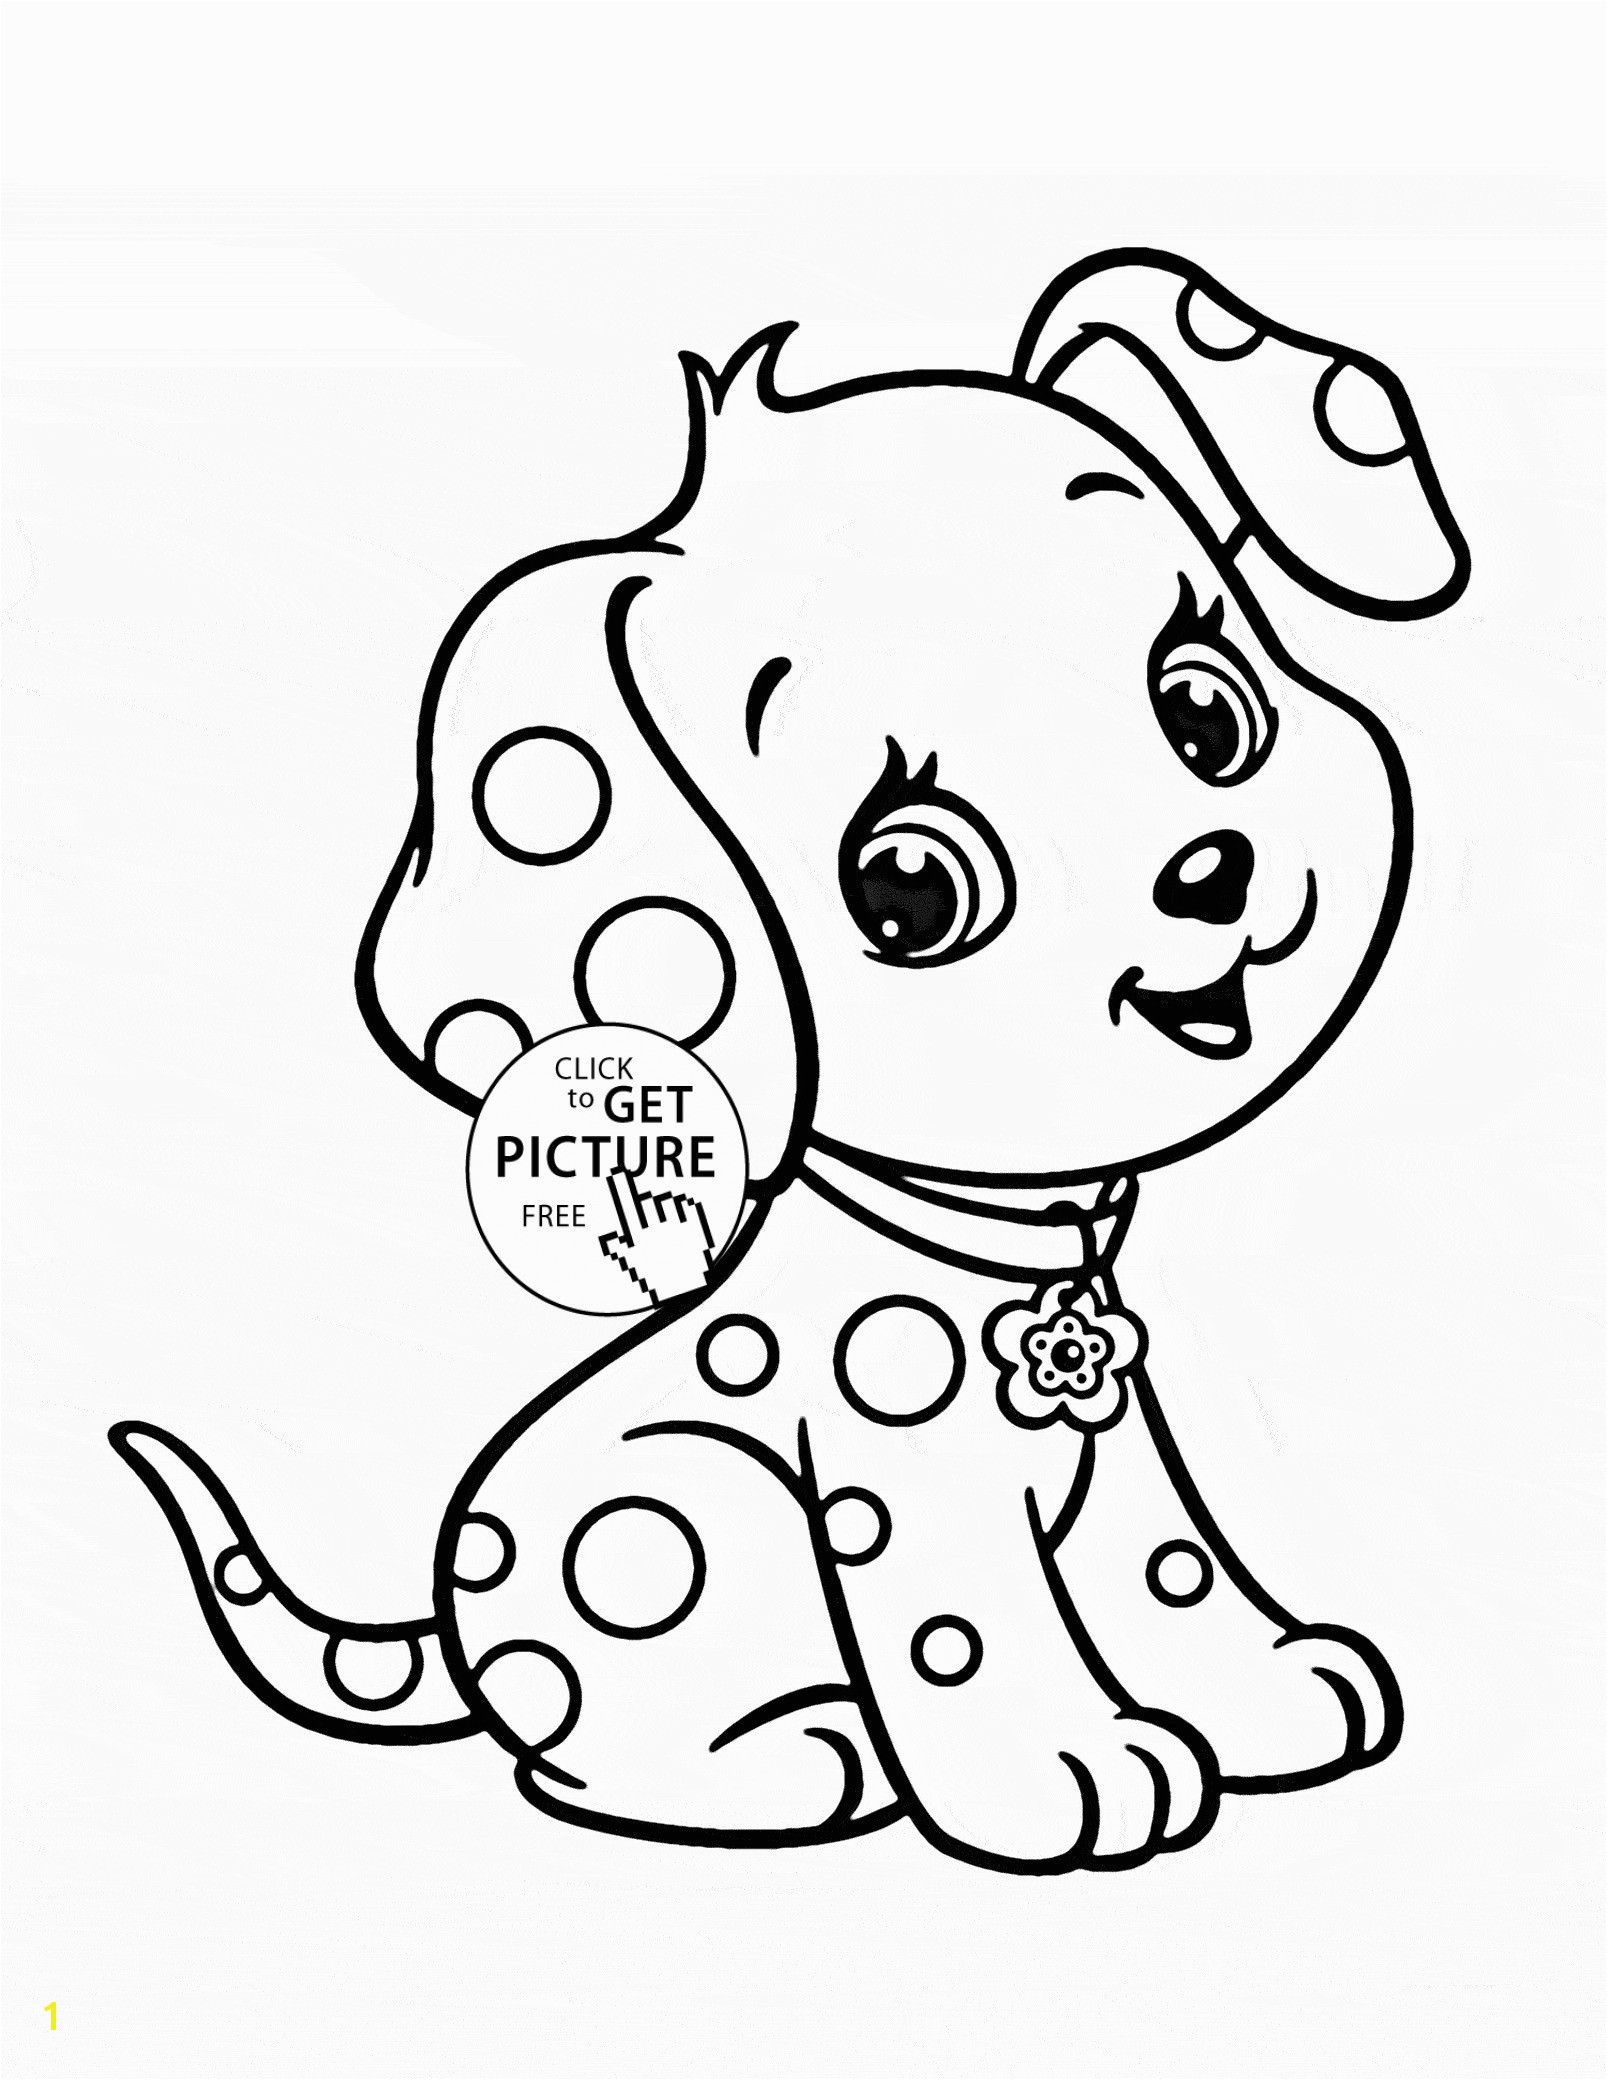 Leapfrog Imagination Desk Coloring Pages Collection Free Ba Animal Coloring Pages Pictures Sabadaphnecottage